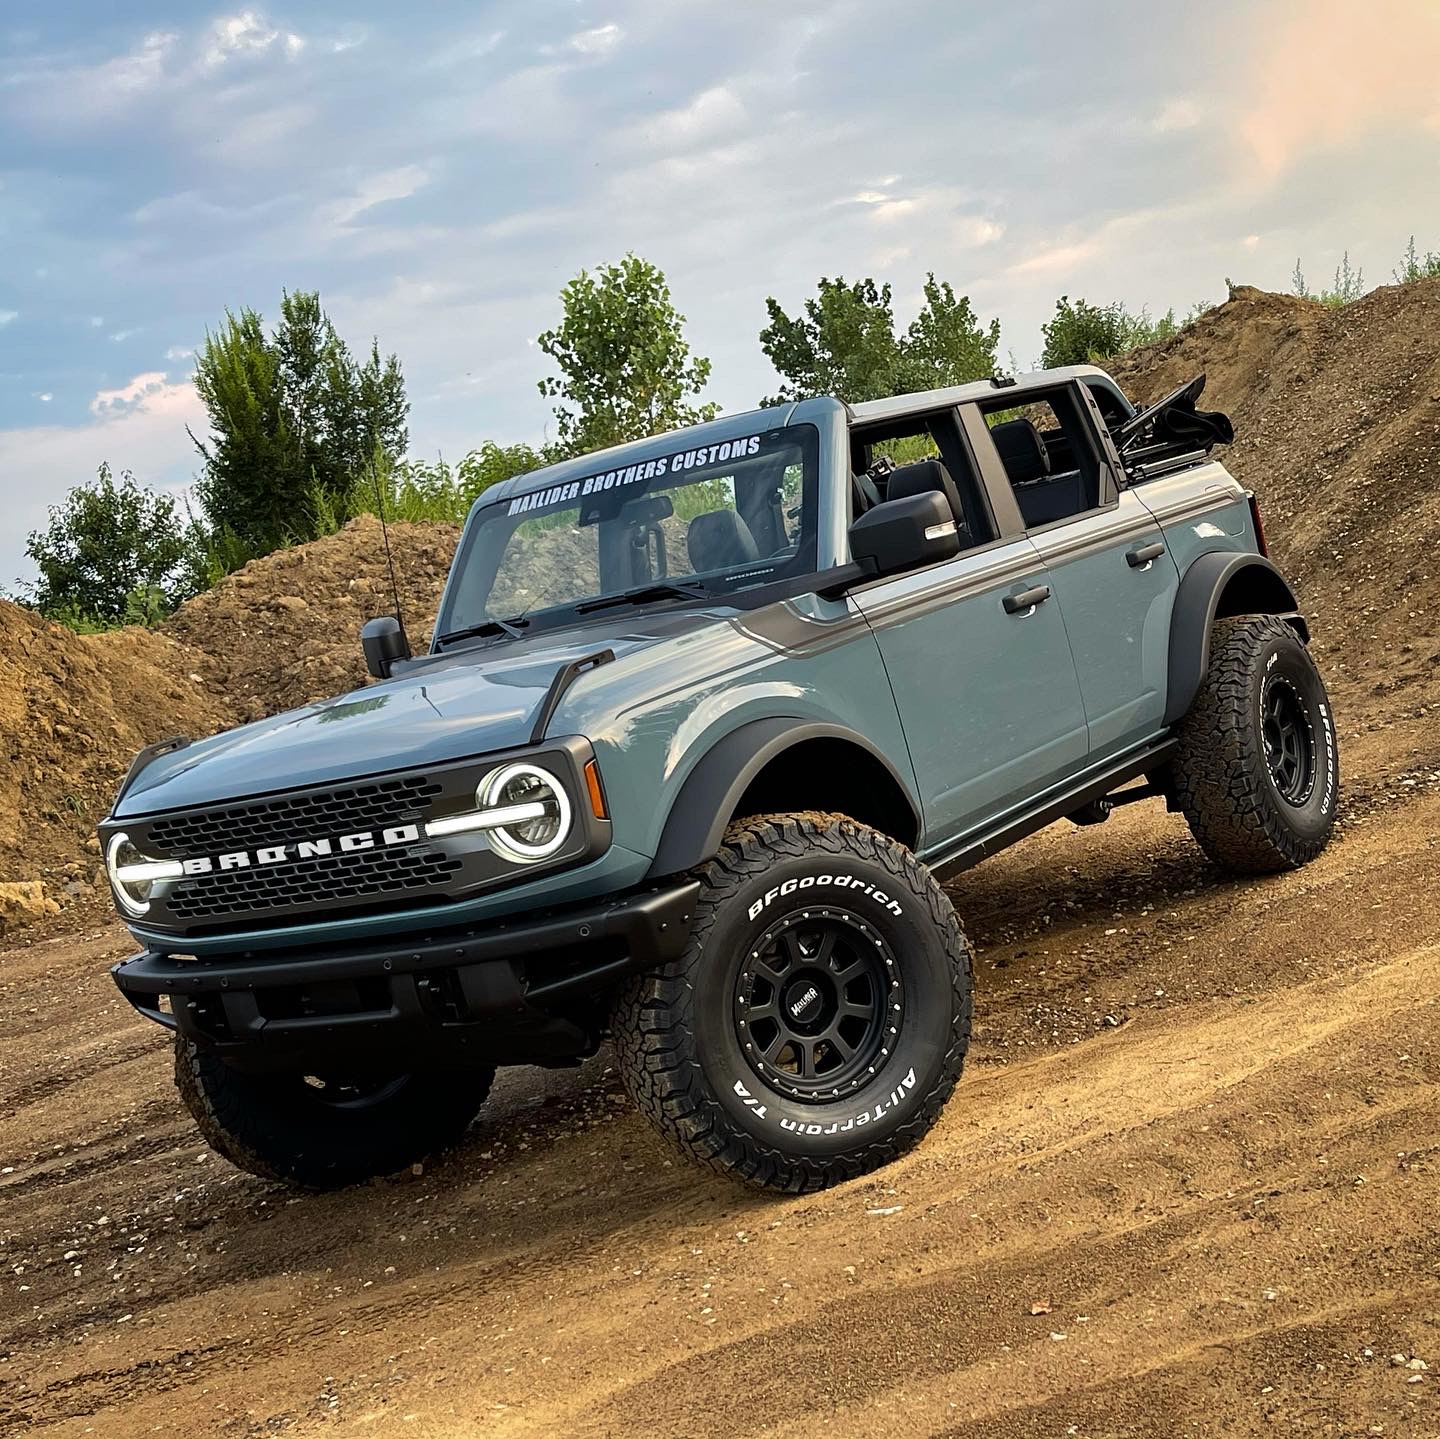 Ford Bronco 37x12.5x17’s on our 4” lift kit with -12 offset! ABFB6E54-9F31-4F50-8AD4-0FC5513C8CB6